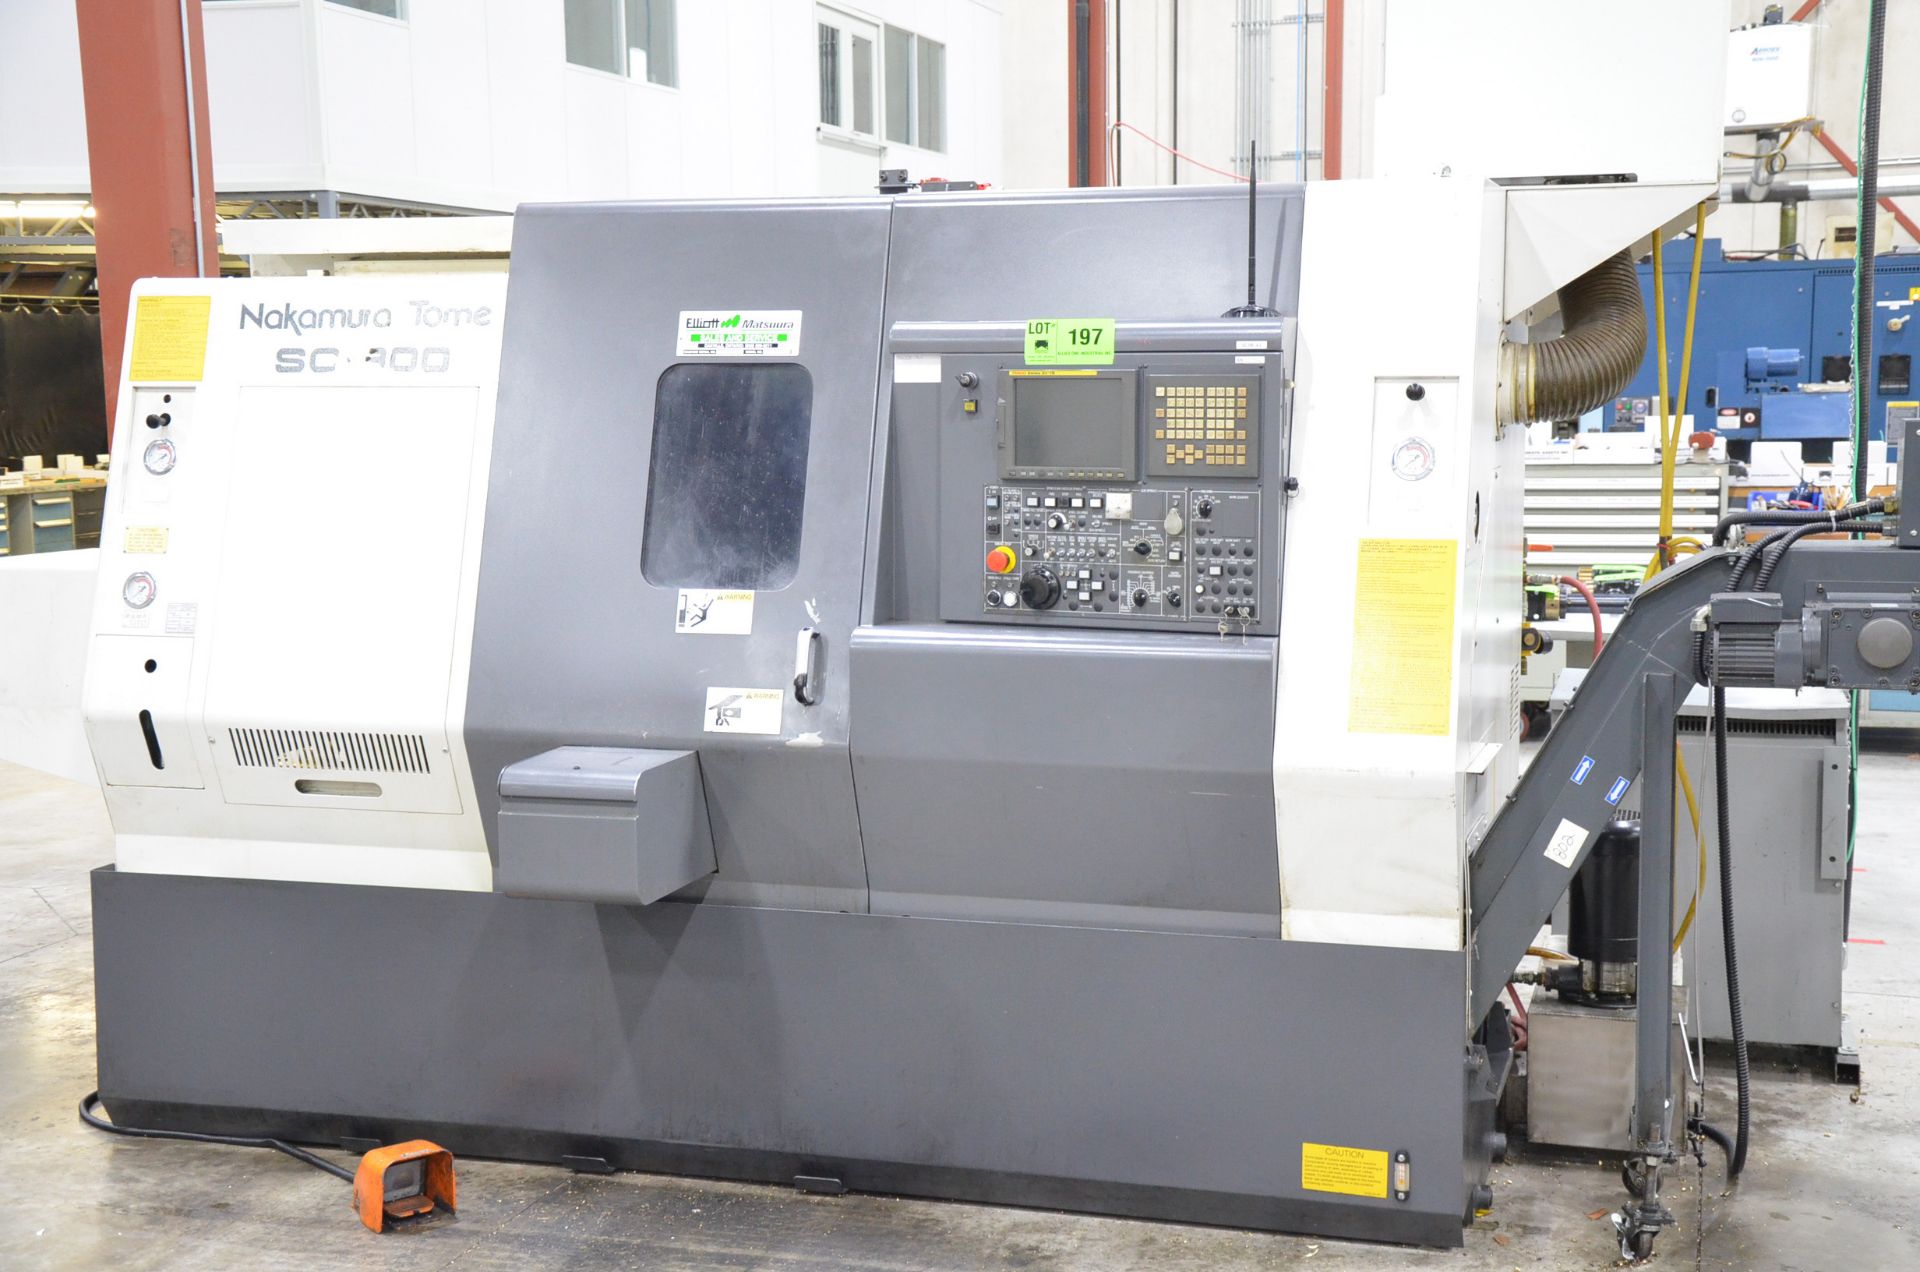 NAKAMURA-TOME SC300 CNC TURNING AND LIVE MILLING CENTER WITH FANUC 21I-TB CNC CONTROL, 22.04" SWING, - Image 15 of 16